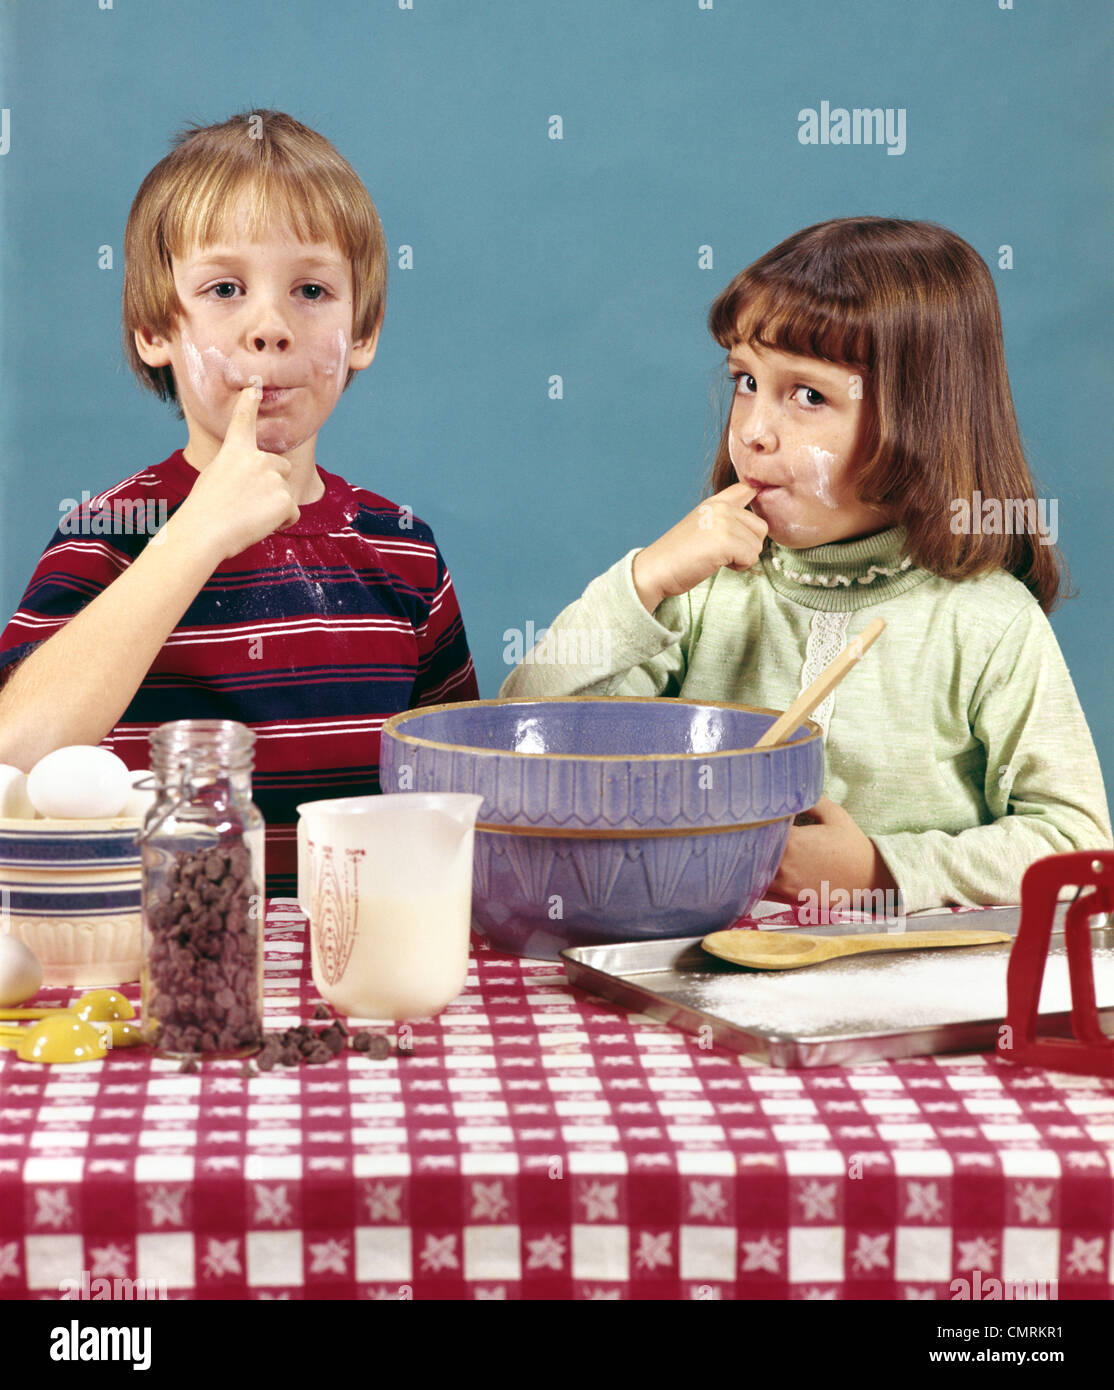 1970 1970s RETRO BOY GIRL BROTHER SISTER MAKING COOKIES TASTING BATTER CHOCOLATE CHIPS BAKING COOKING Stock Photo